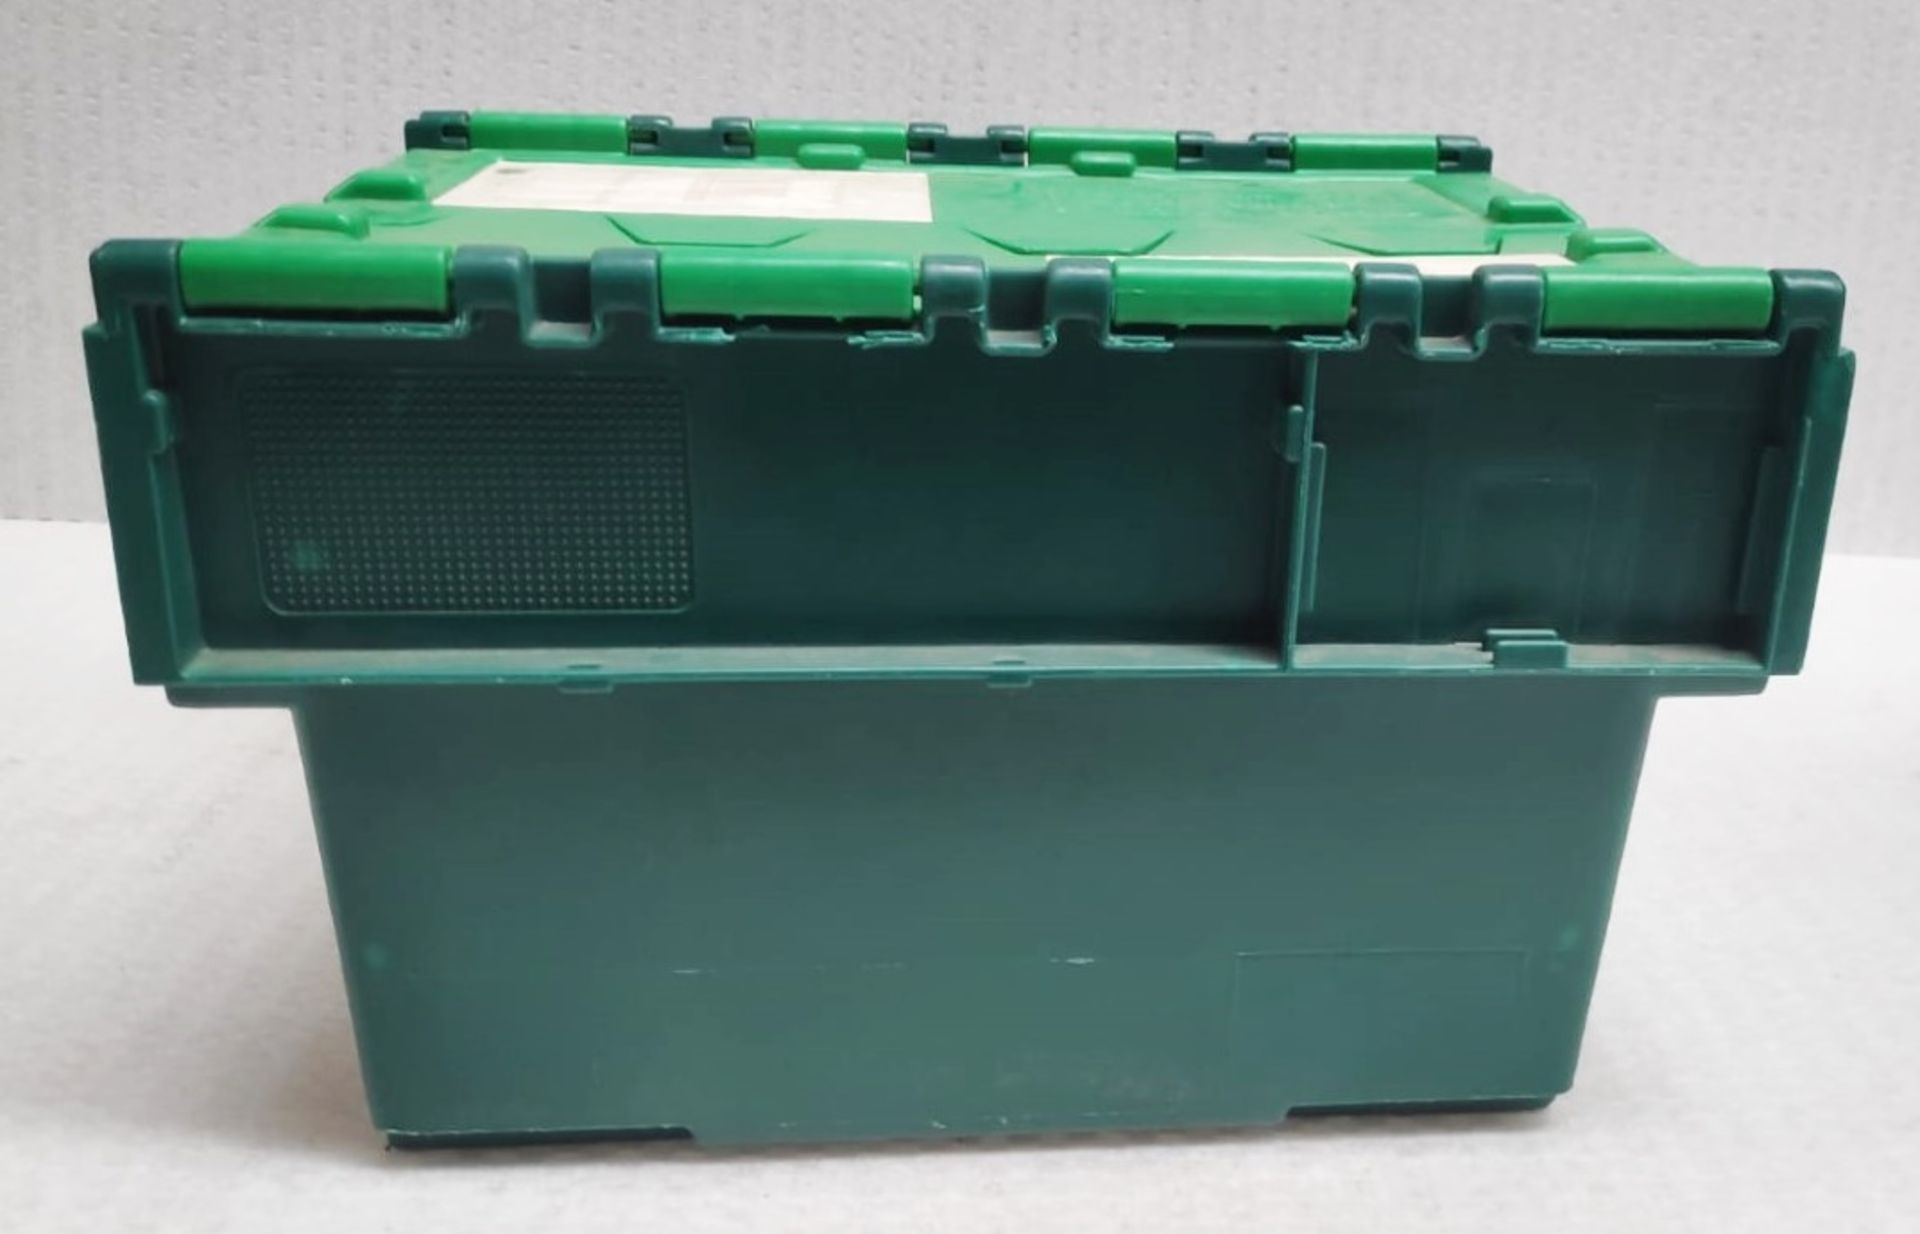 20 x Robust Compact Green Plastic Stackable Secure Storage Boxes With Attached Hinged Lids - - Image 4 of 6